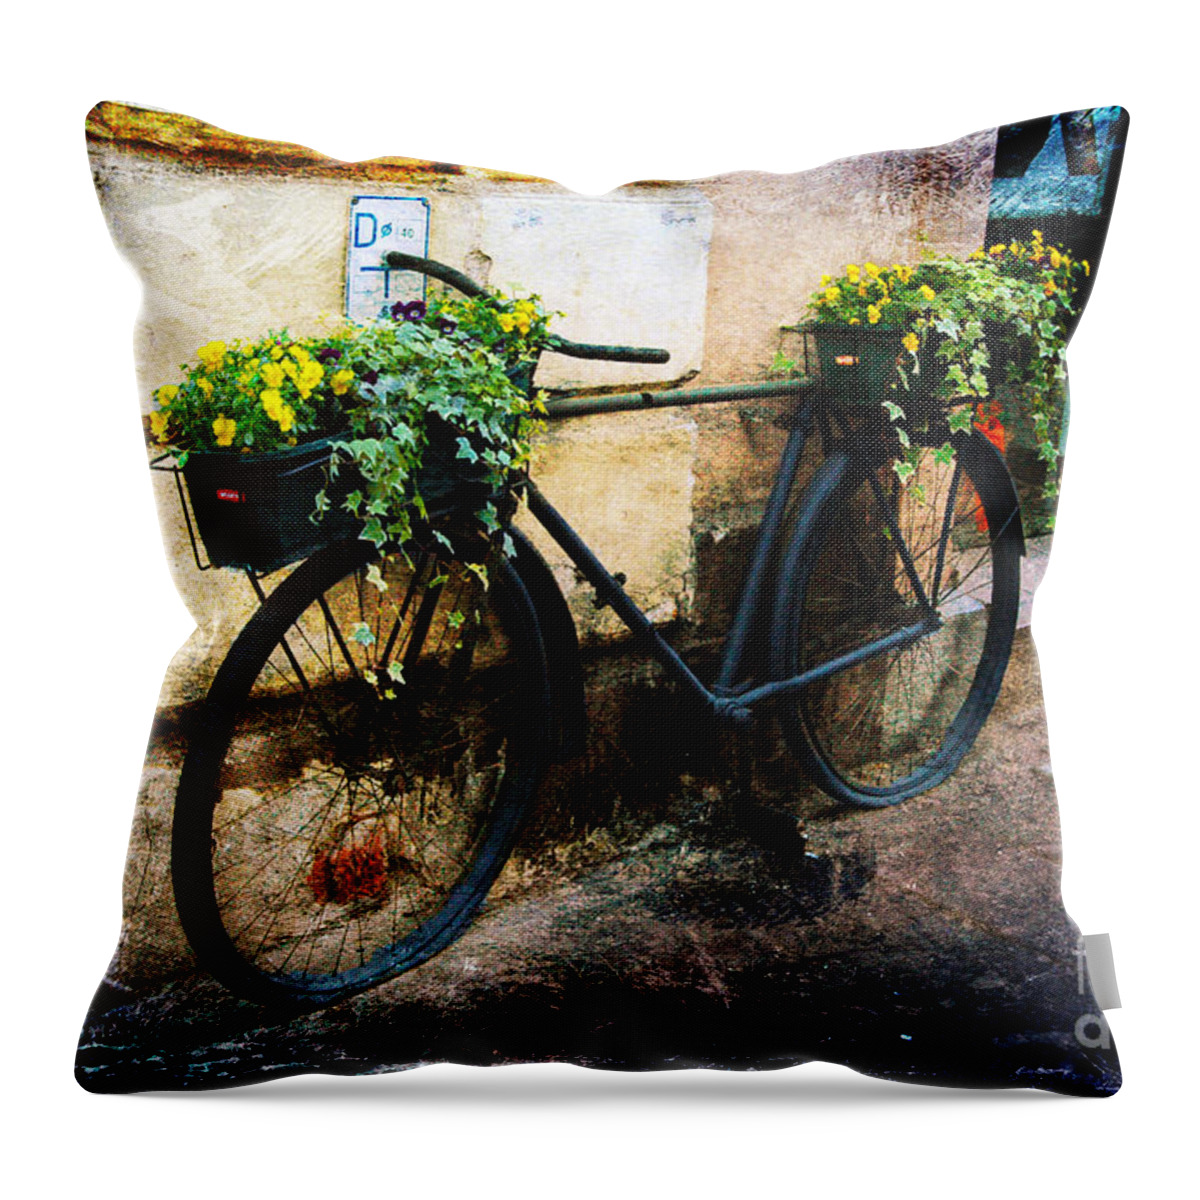 Bike Throw Pillow featuring the photograph Re-Cycle by Randi Grace Nilsberg